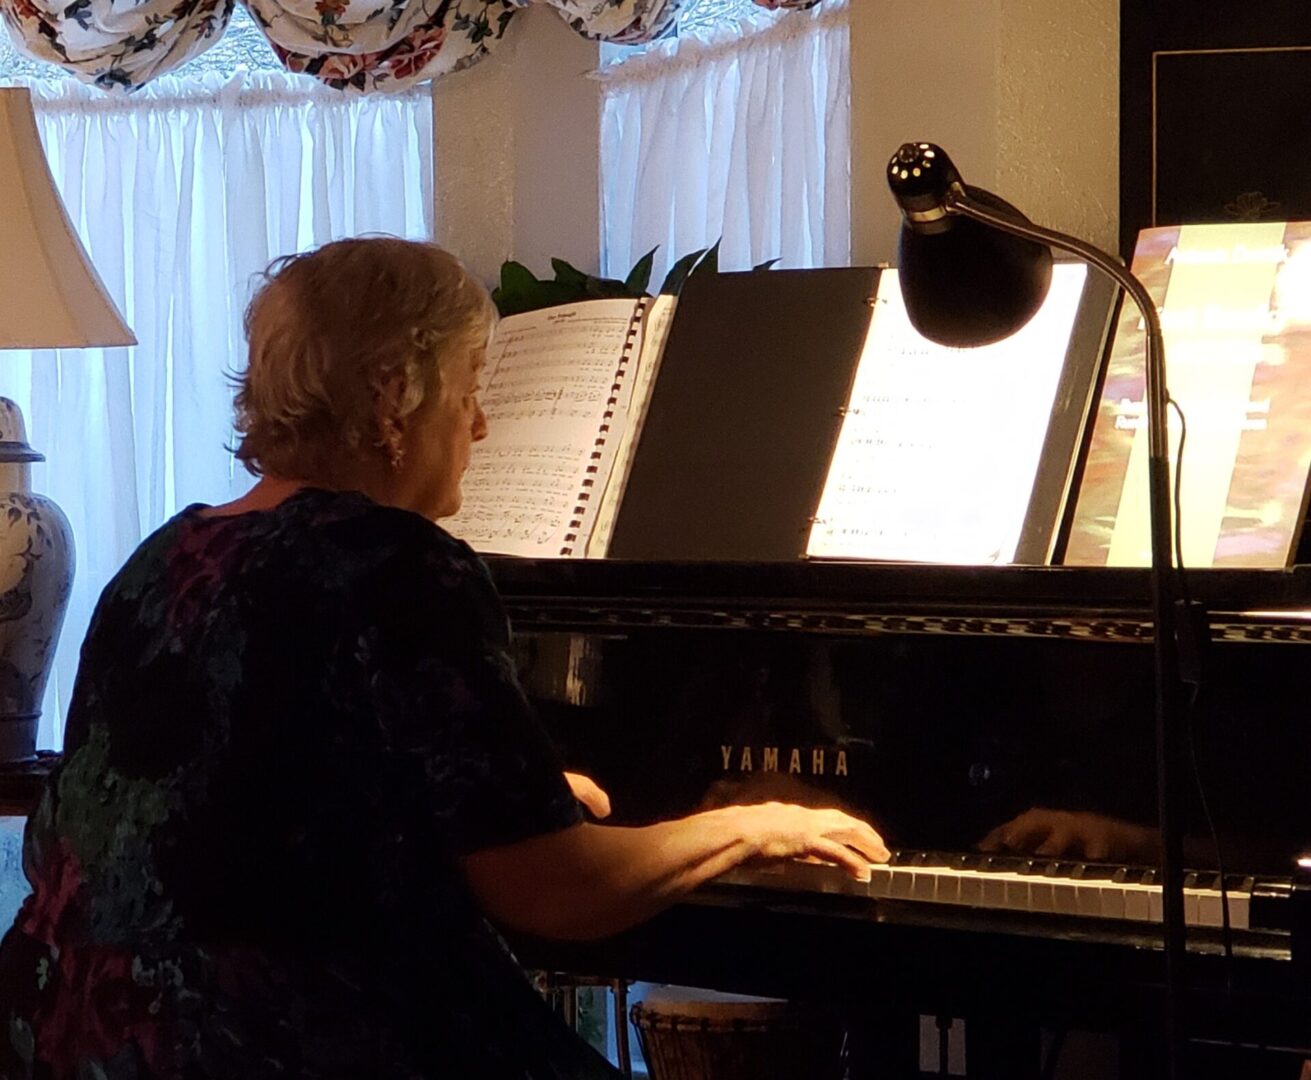 A woman playing a piano in a living room.